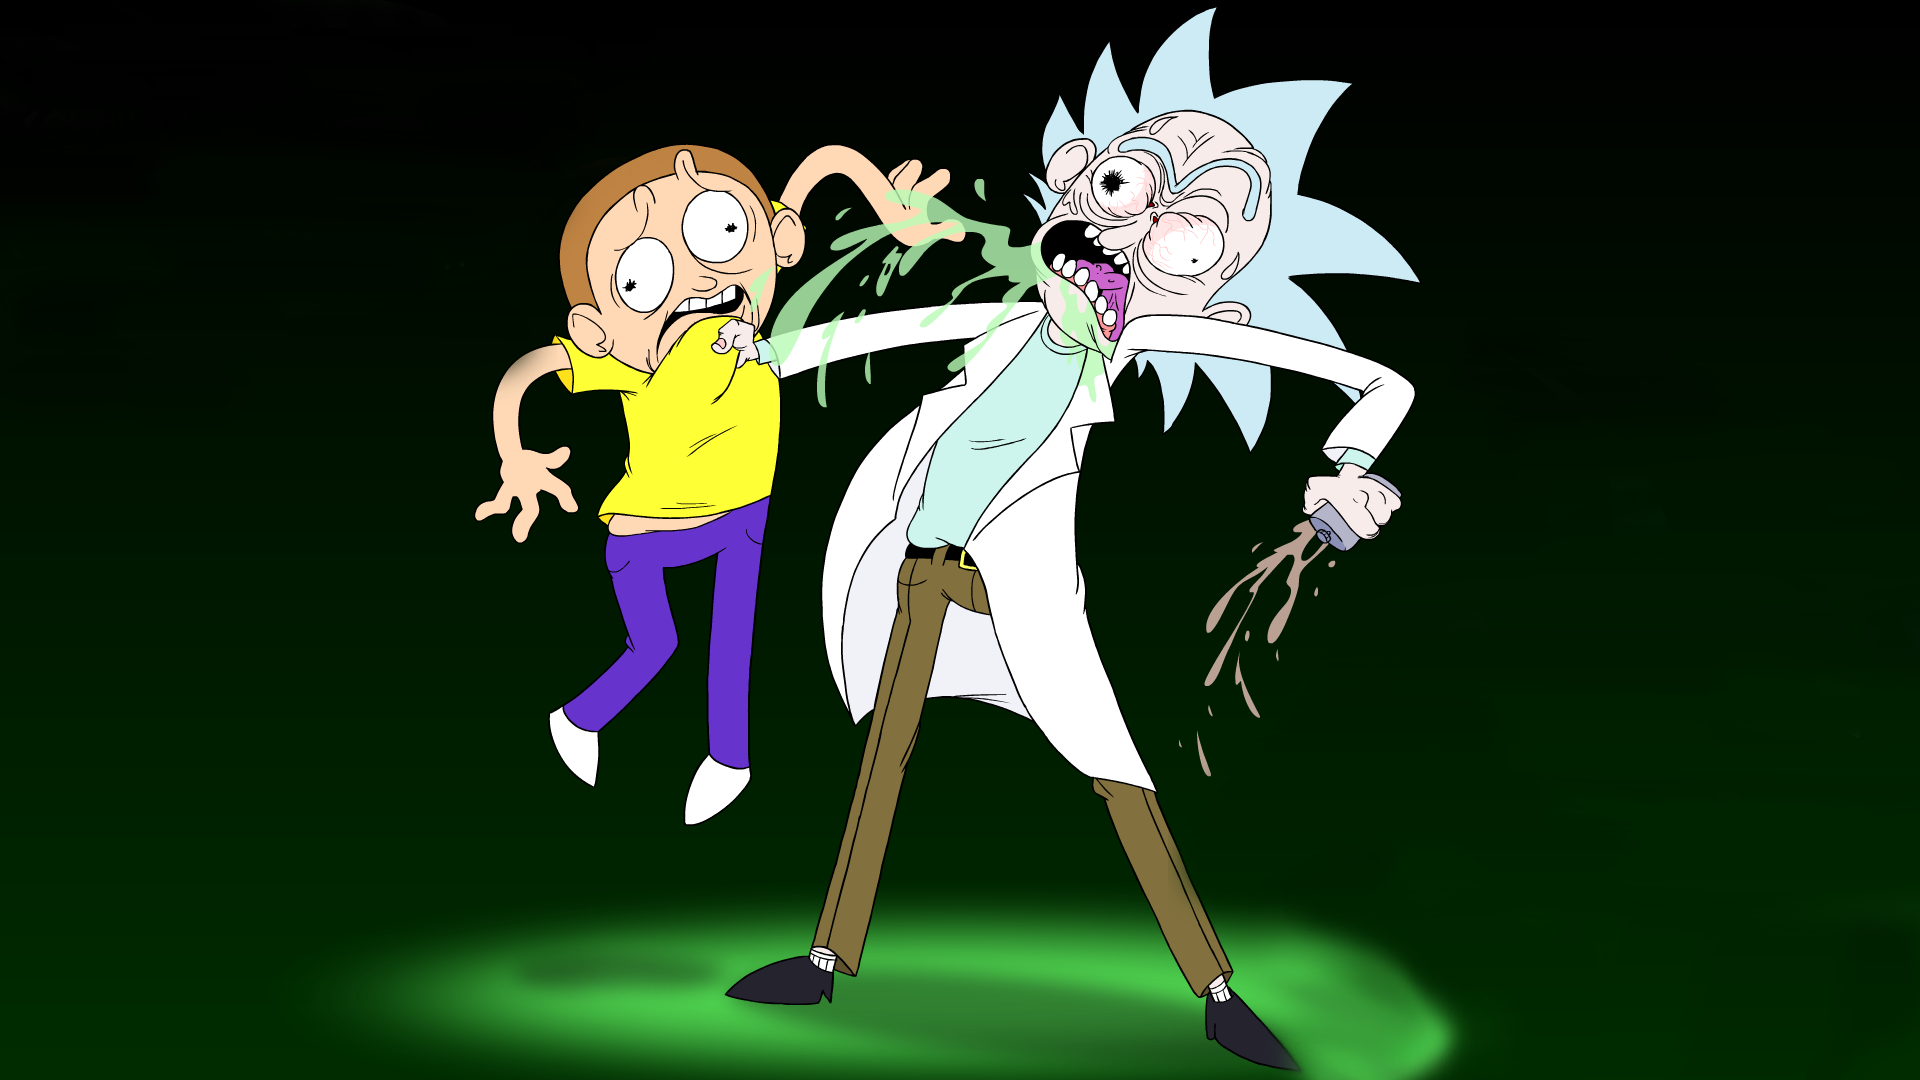 Rick and Morty Wallpaper By Psychicpebbles tried my best to get 1920x1080